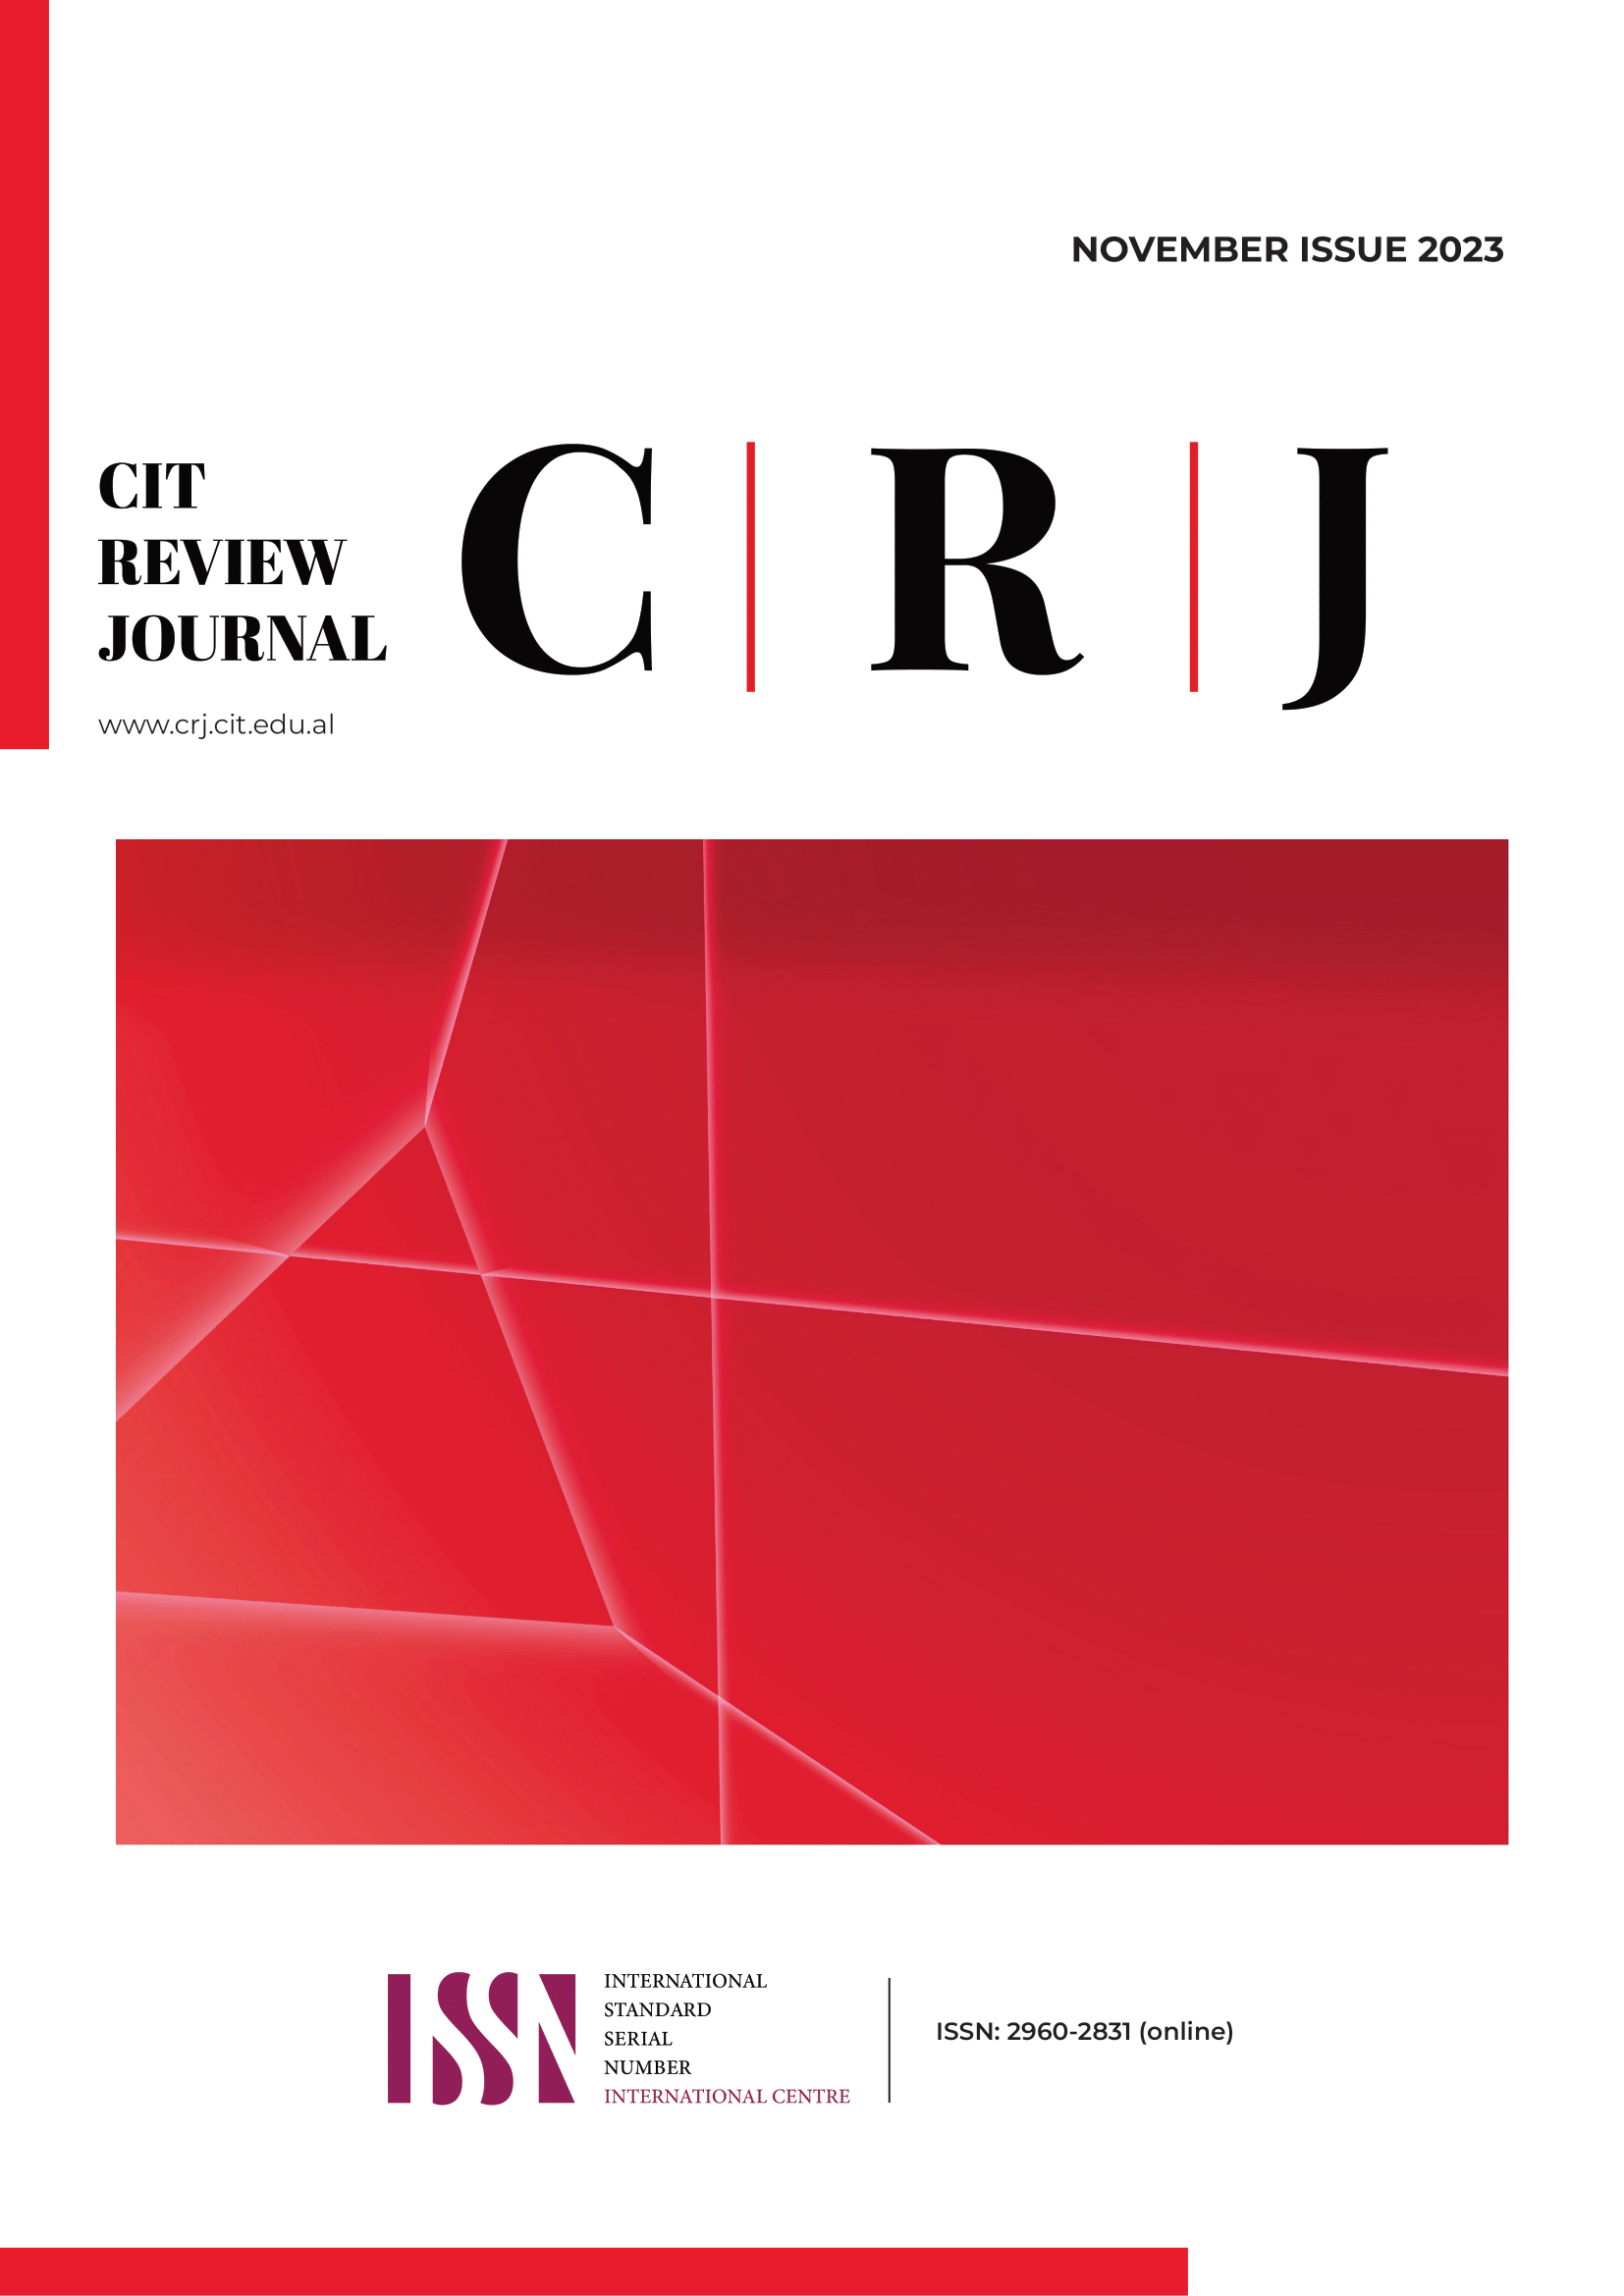 CIT Review Journal November Issue 2023